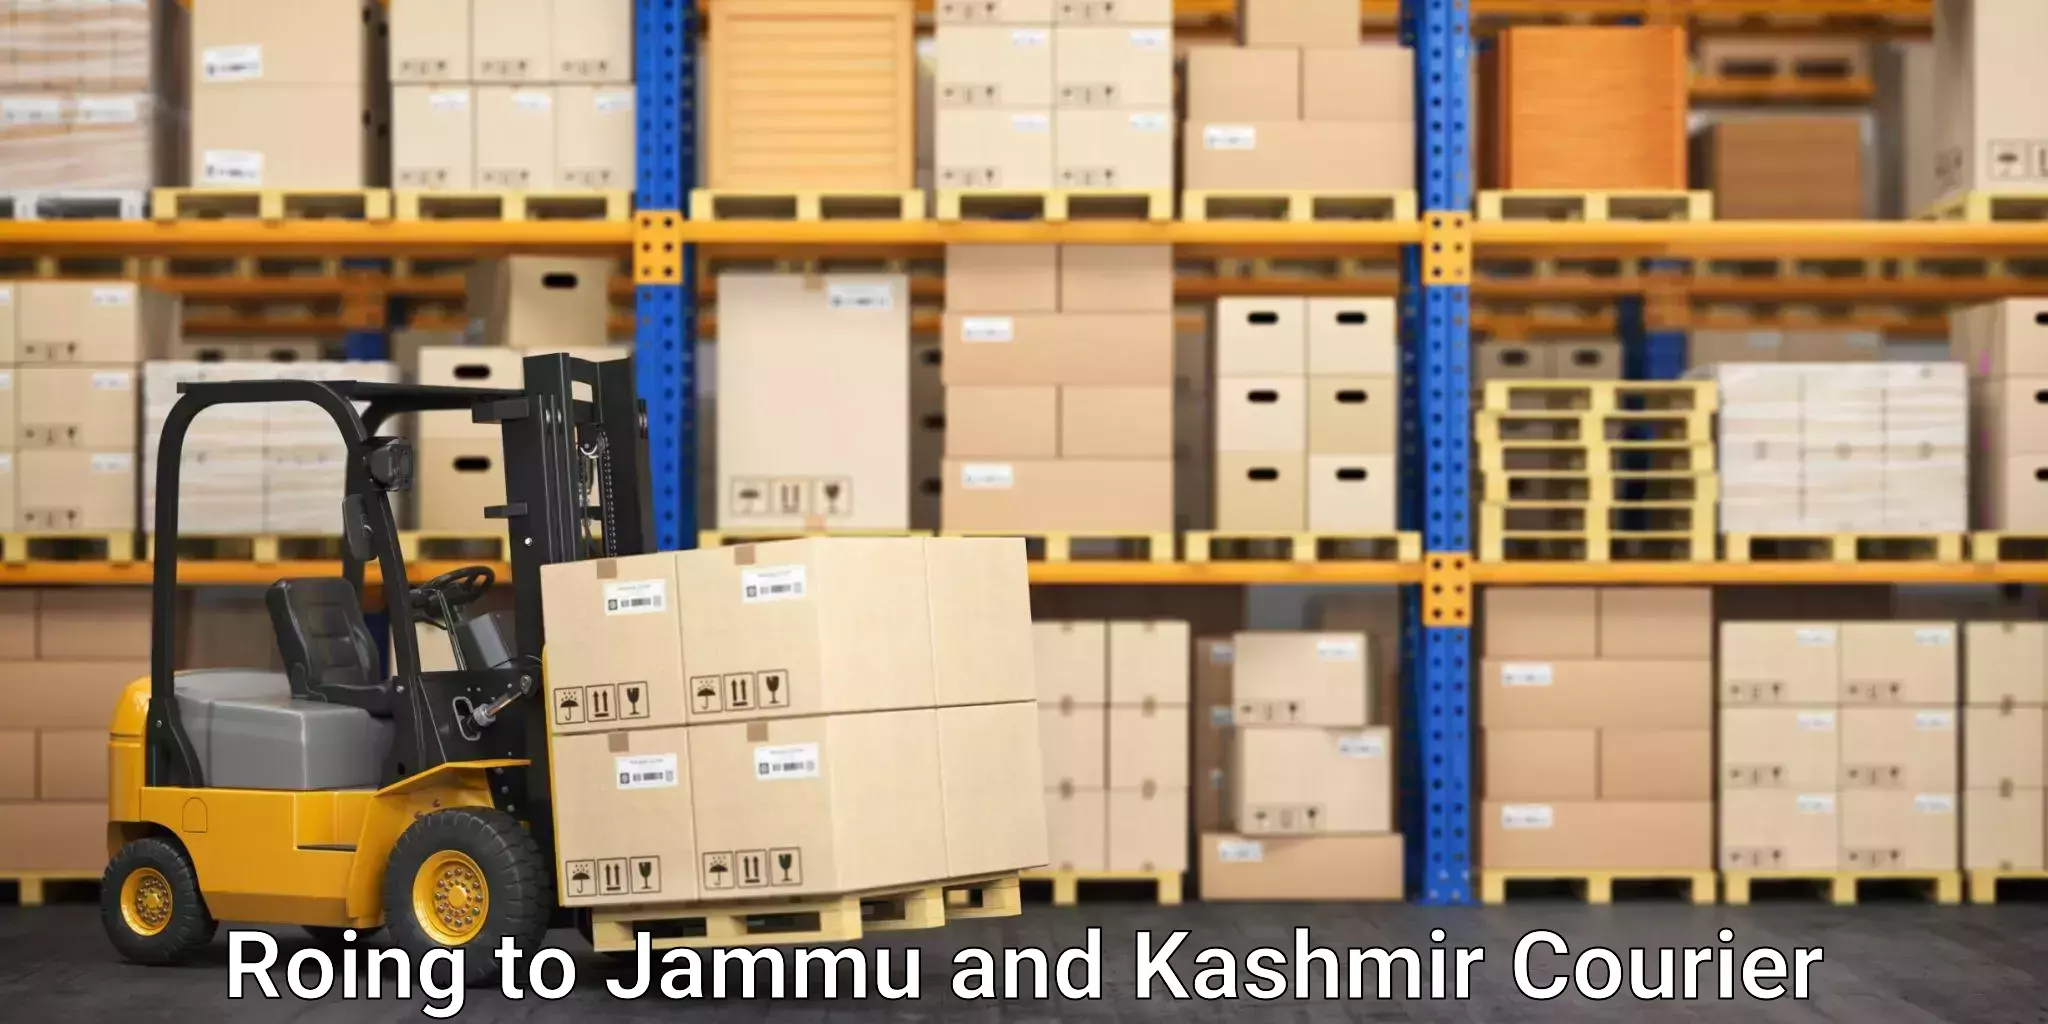 Reliable parcel services Roing to Jammu and Kashmir